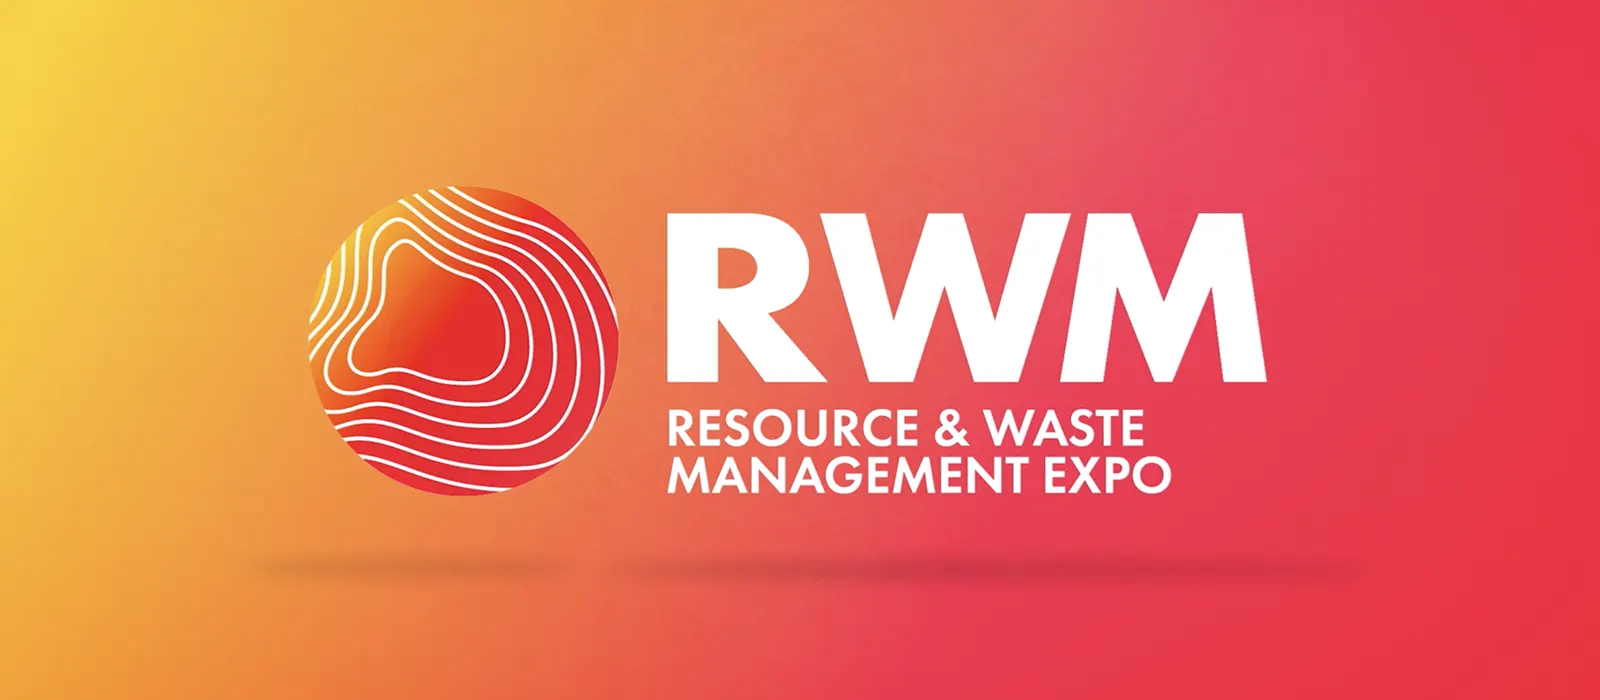 RWM - The Resource & Waste Management Expo